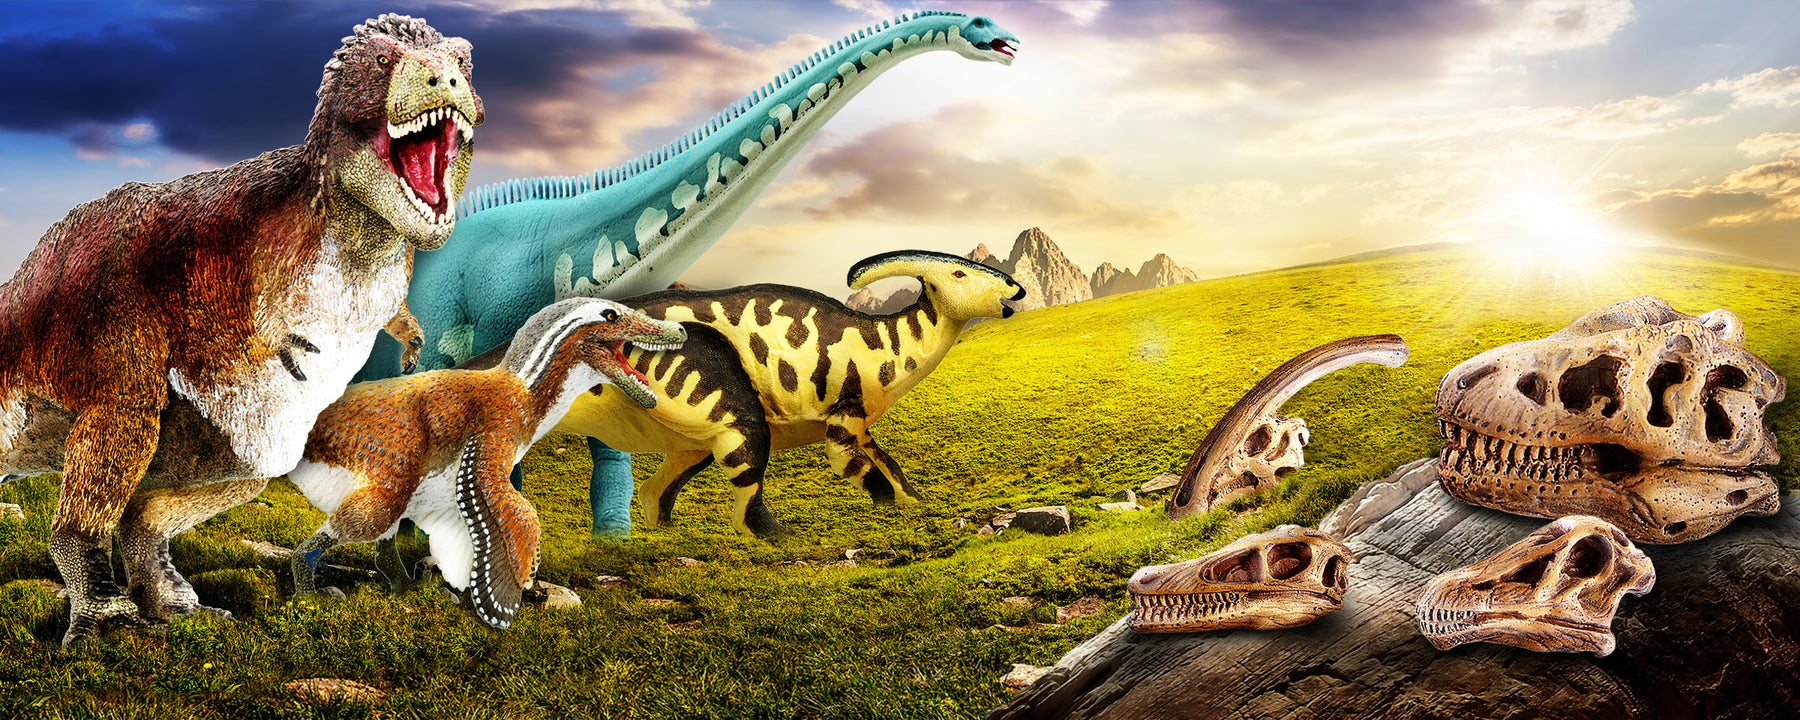 Learn About the Three Ages of Dinosaurs - Triassic, Jurassic, and Cretaceous - Safari Ltd®